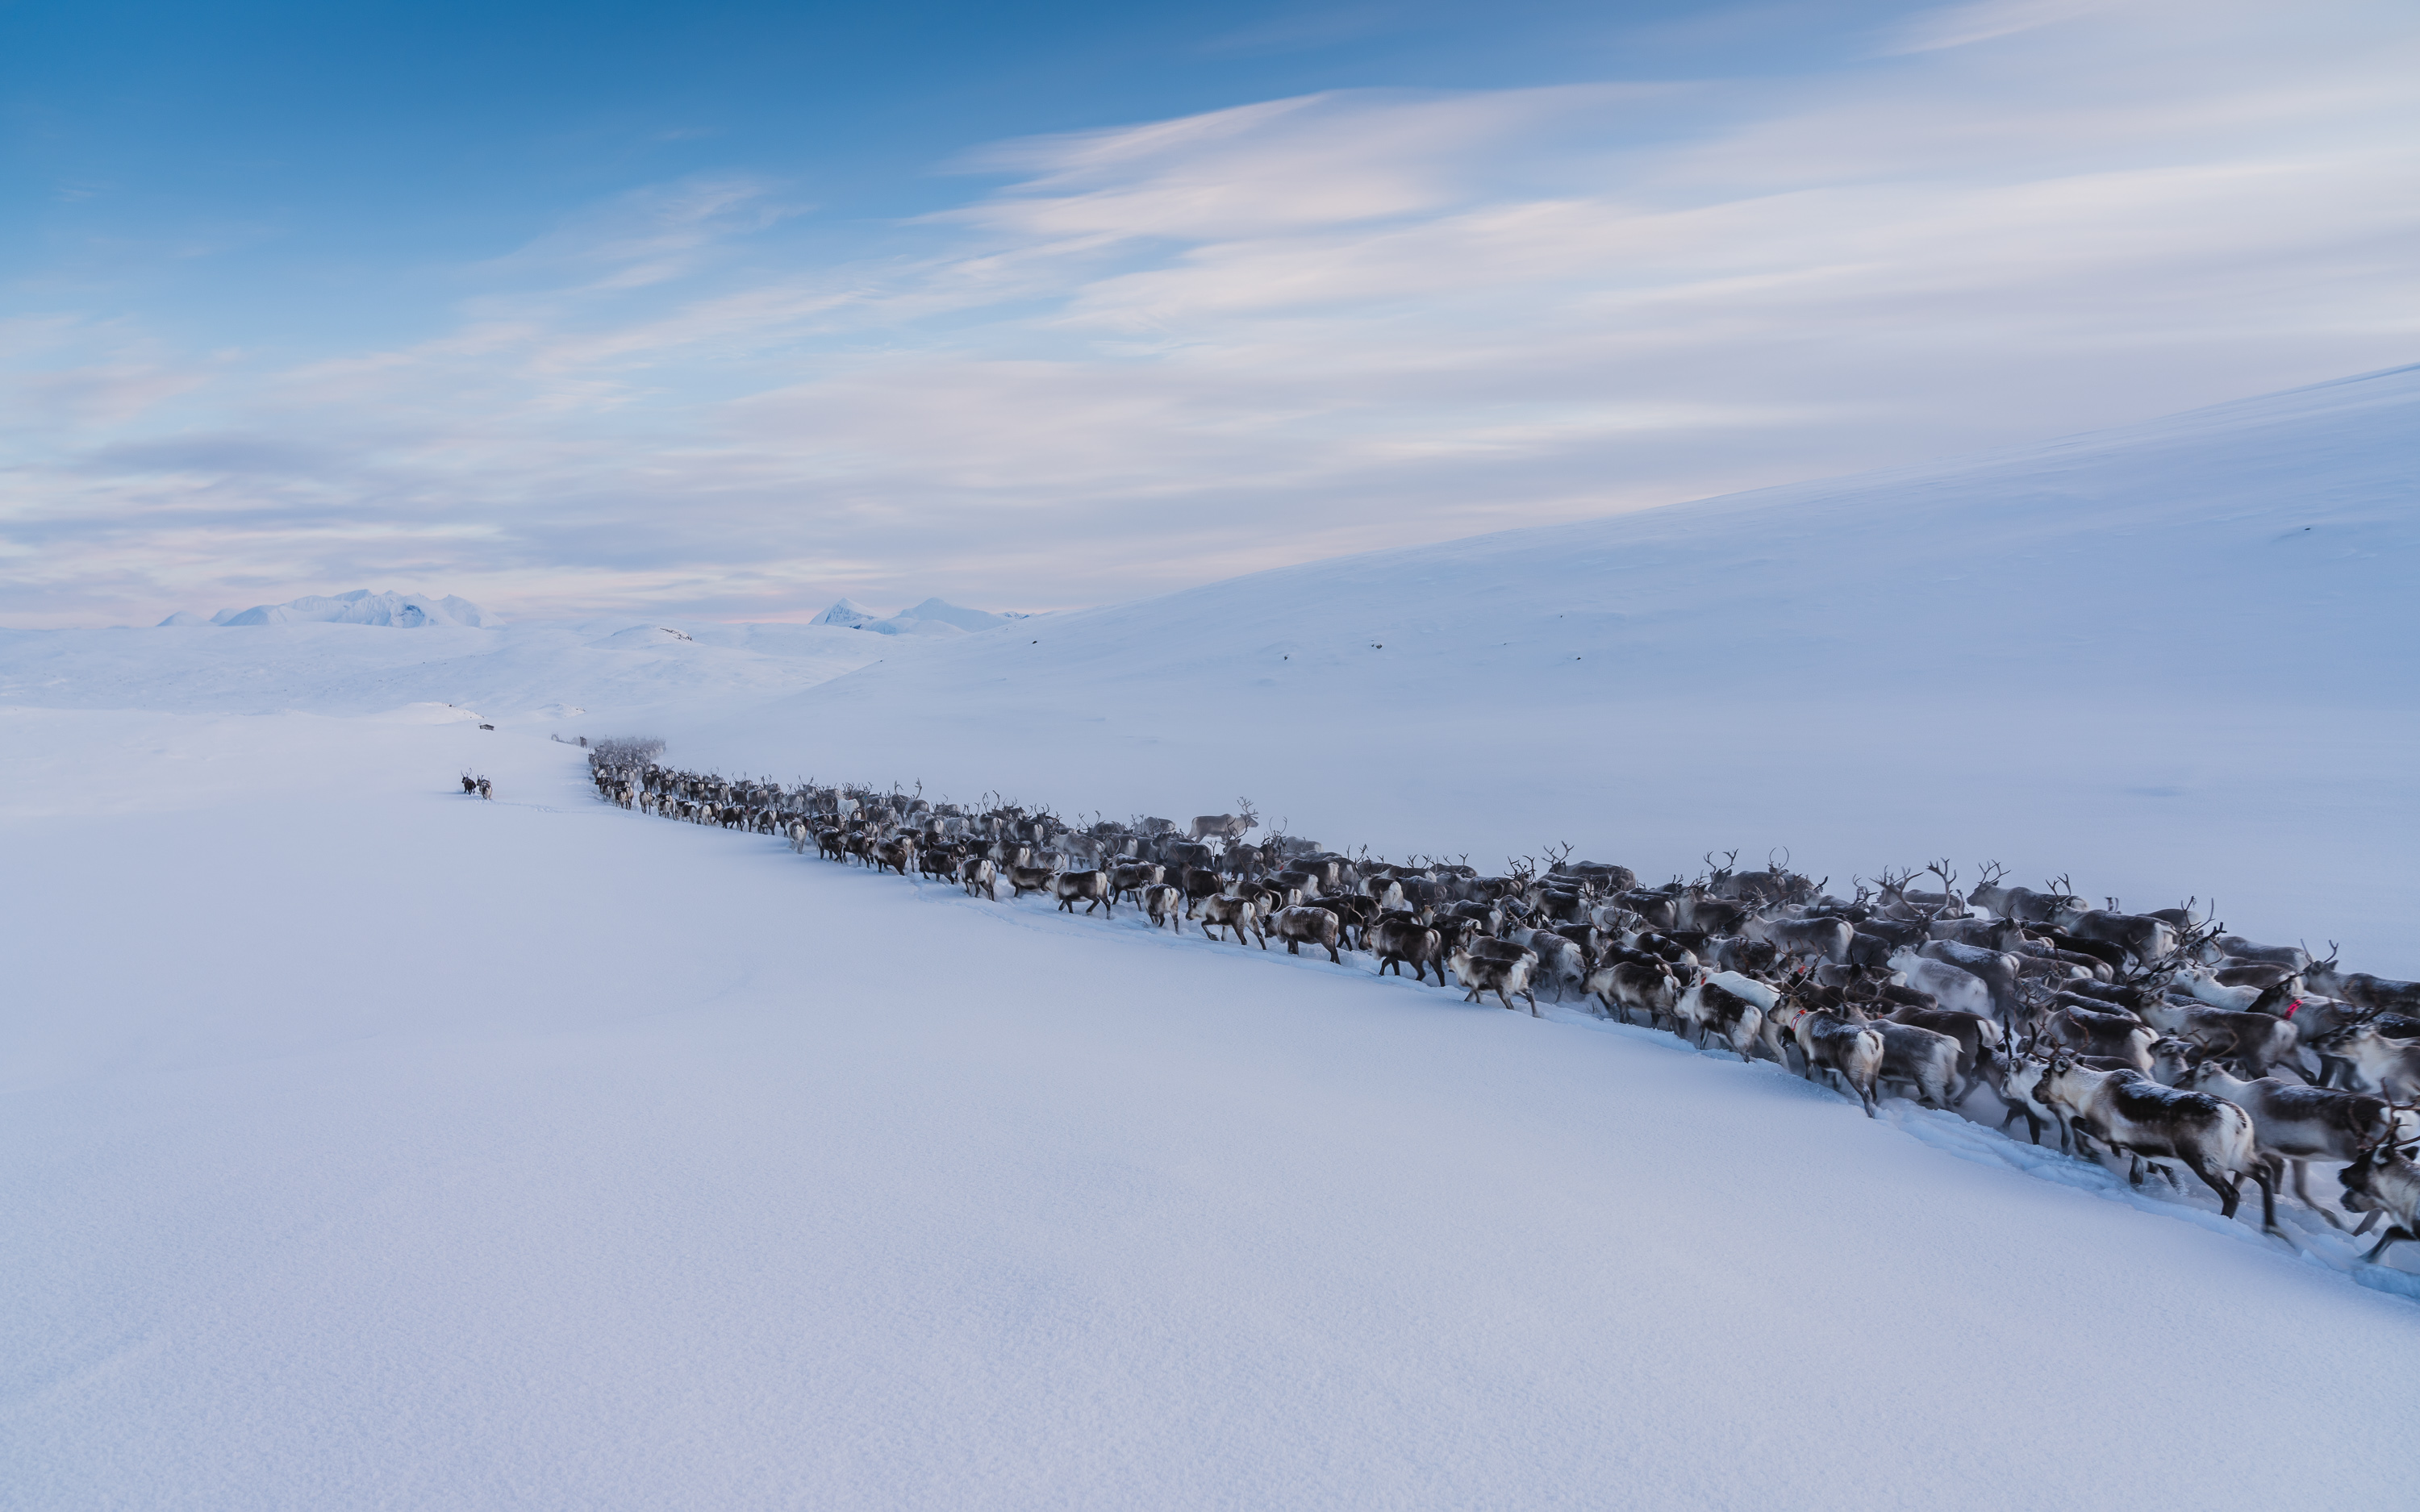 Reindeer herd during migration in a beautiful snow landscape.